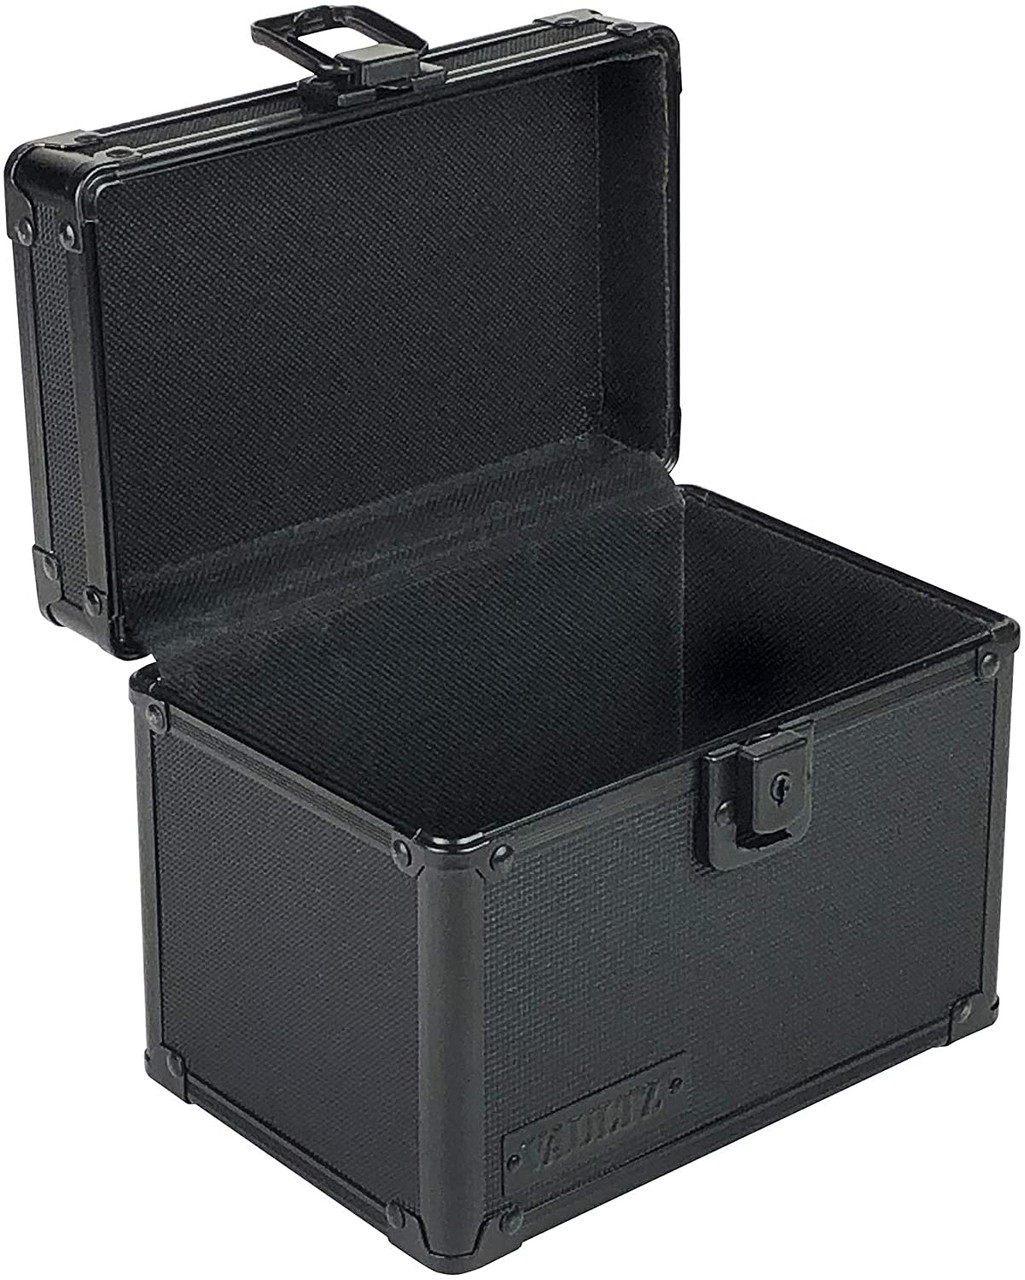 Index Card Case/Box for 4 x 6″ Index Cards – C-Line - CLEARANCE ITEM